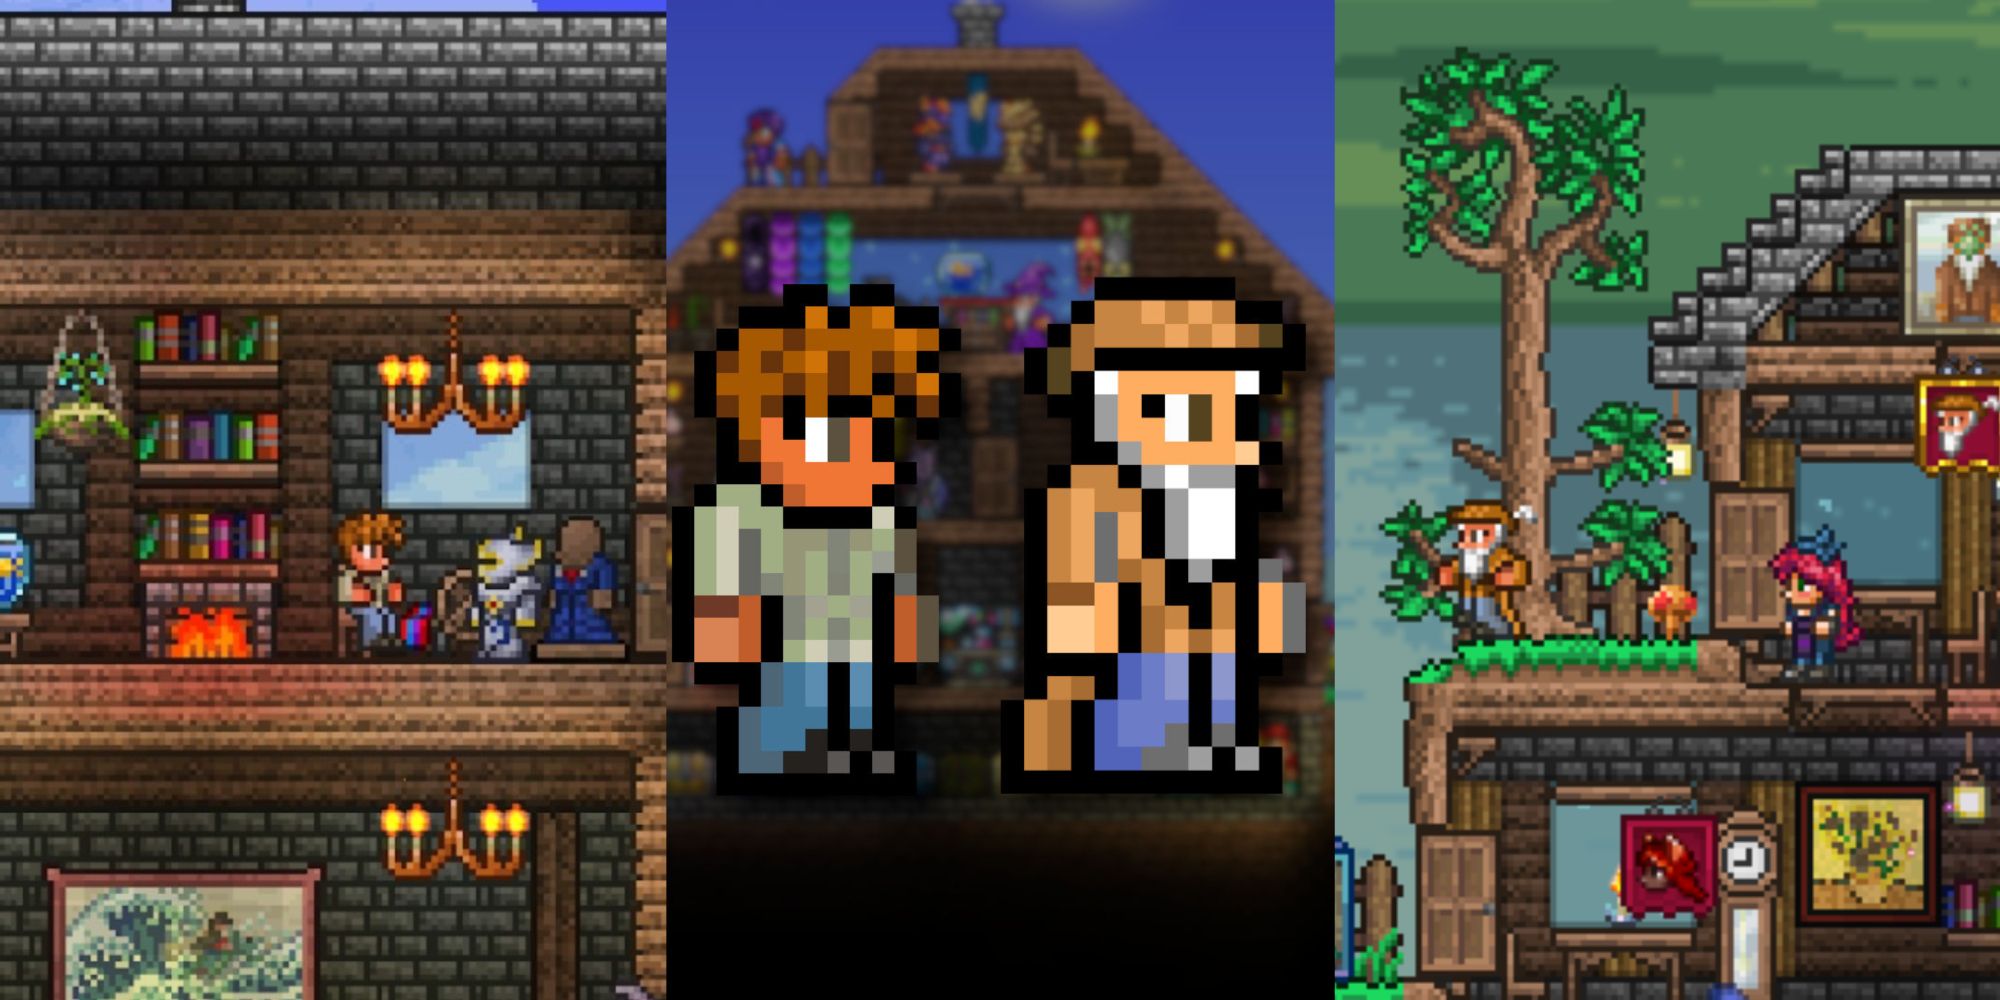 What to replace with Pygmy Necklace? : r/Terraria